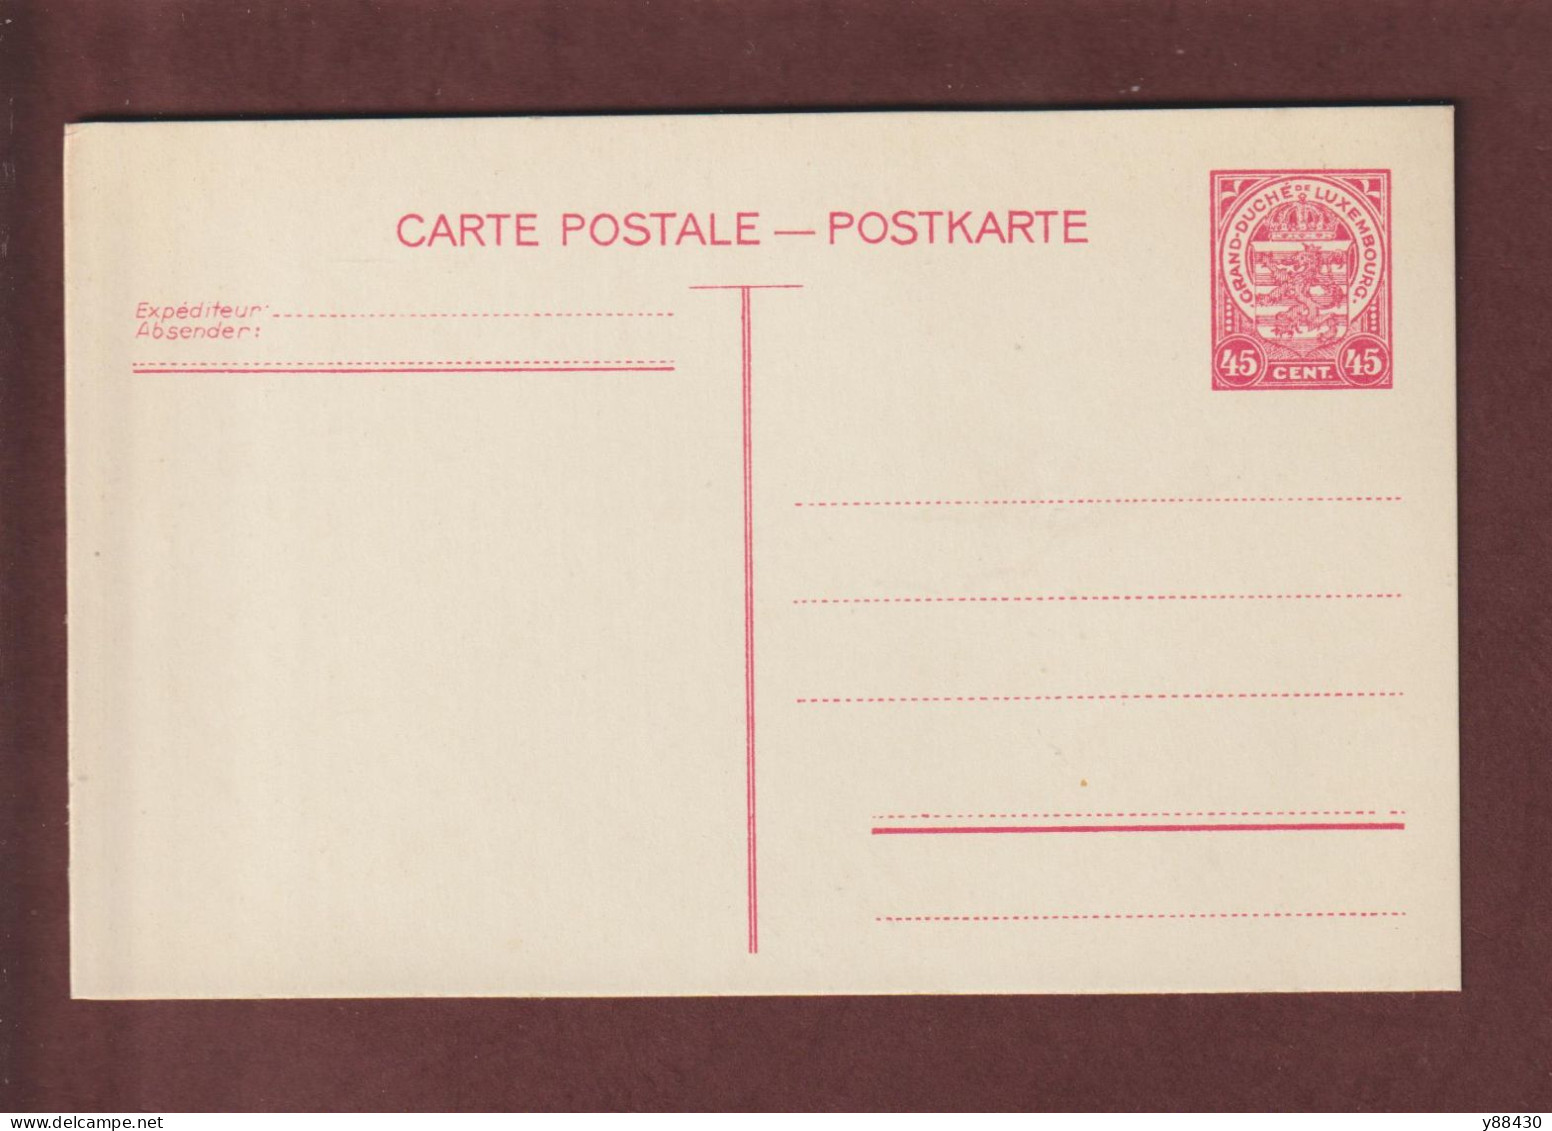 LUXEMBOURG - Entier Postal Neuf - 1910/1930 - Carte Postale  - 2 Scan - Entiers Postaux